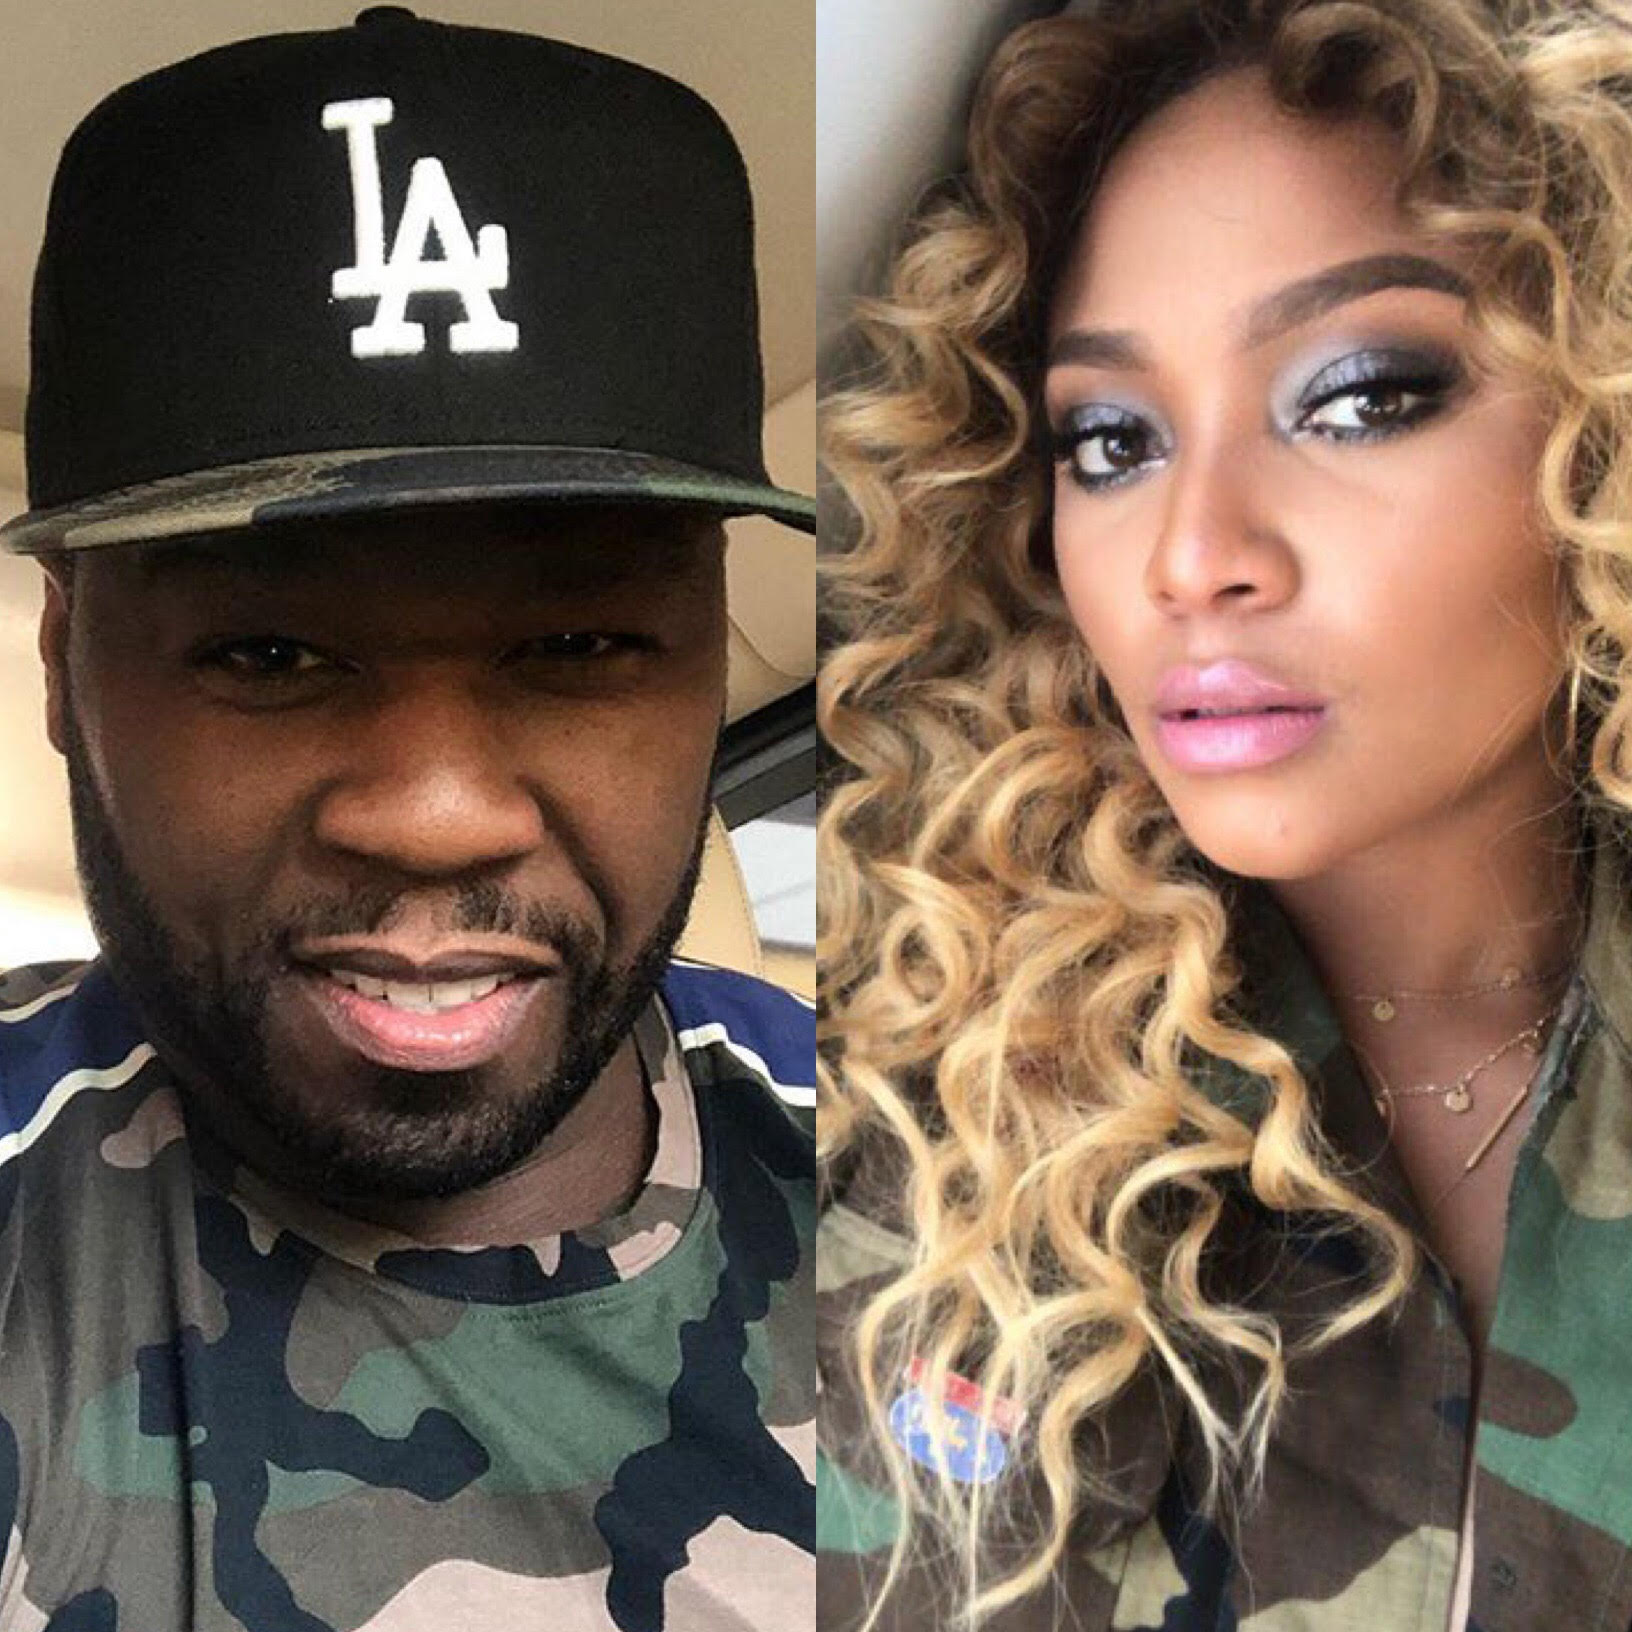 50 Cent Drags Teairra Mari In Multiple Social Media Posts Pay Me My Money Or Ill Take Your Love and Hip Hop Check!